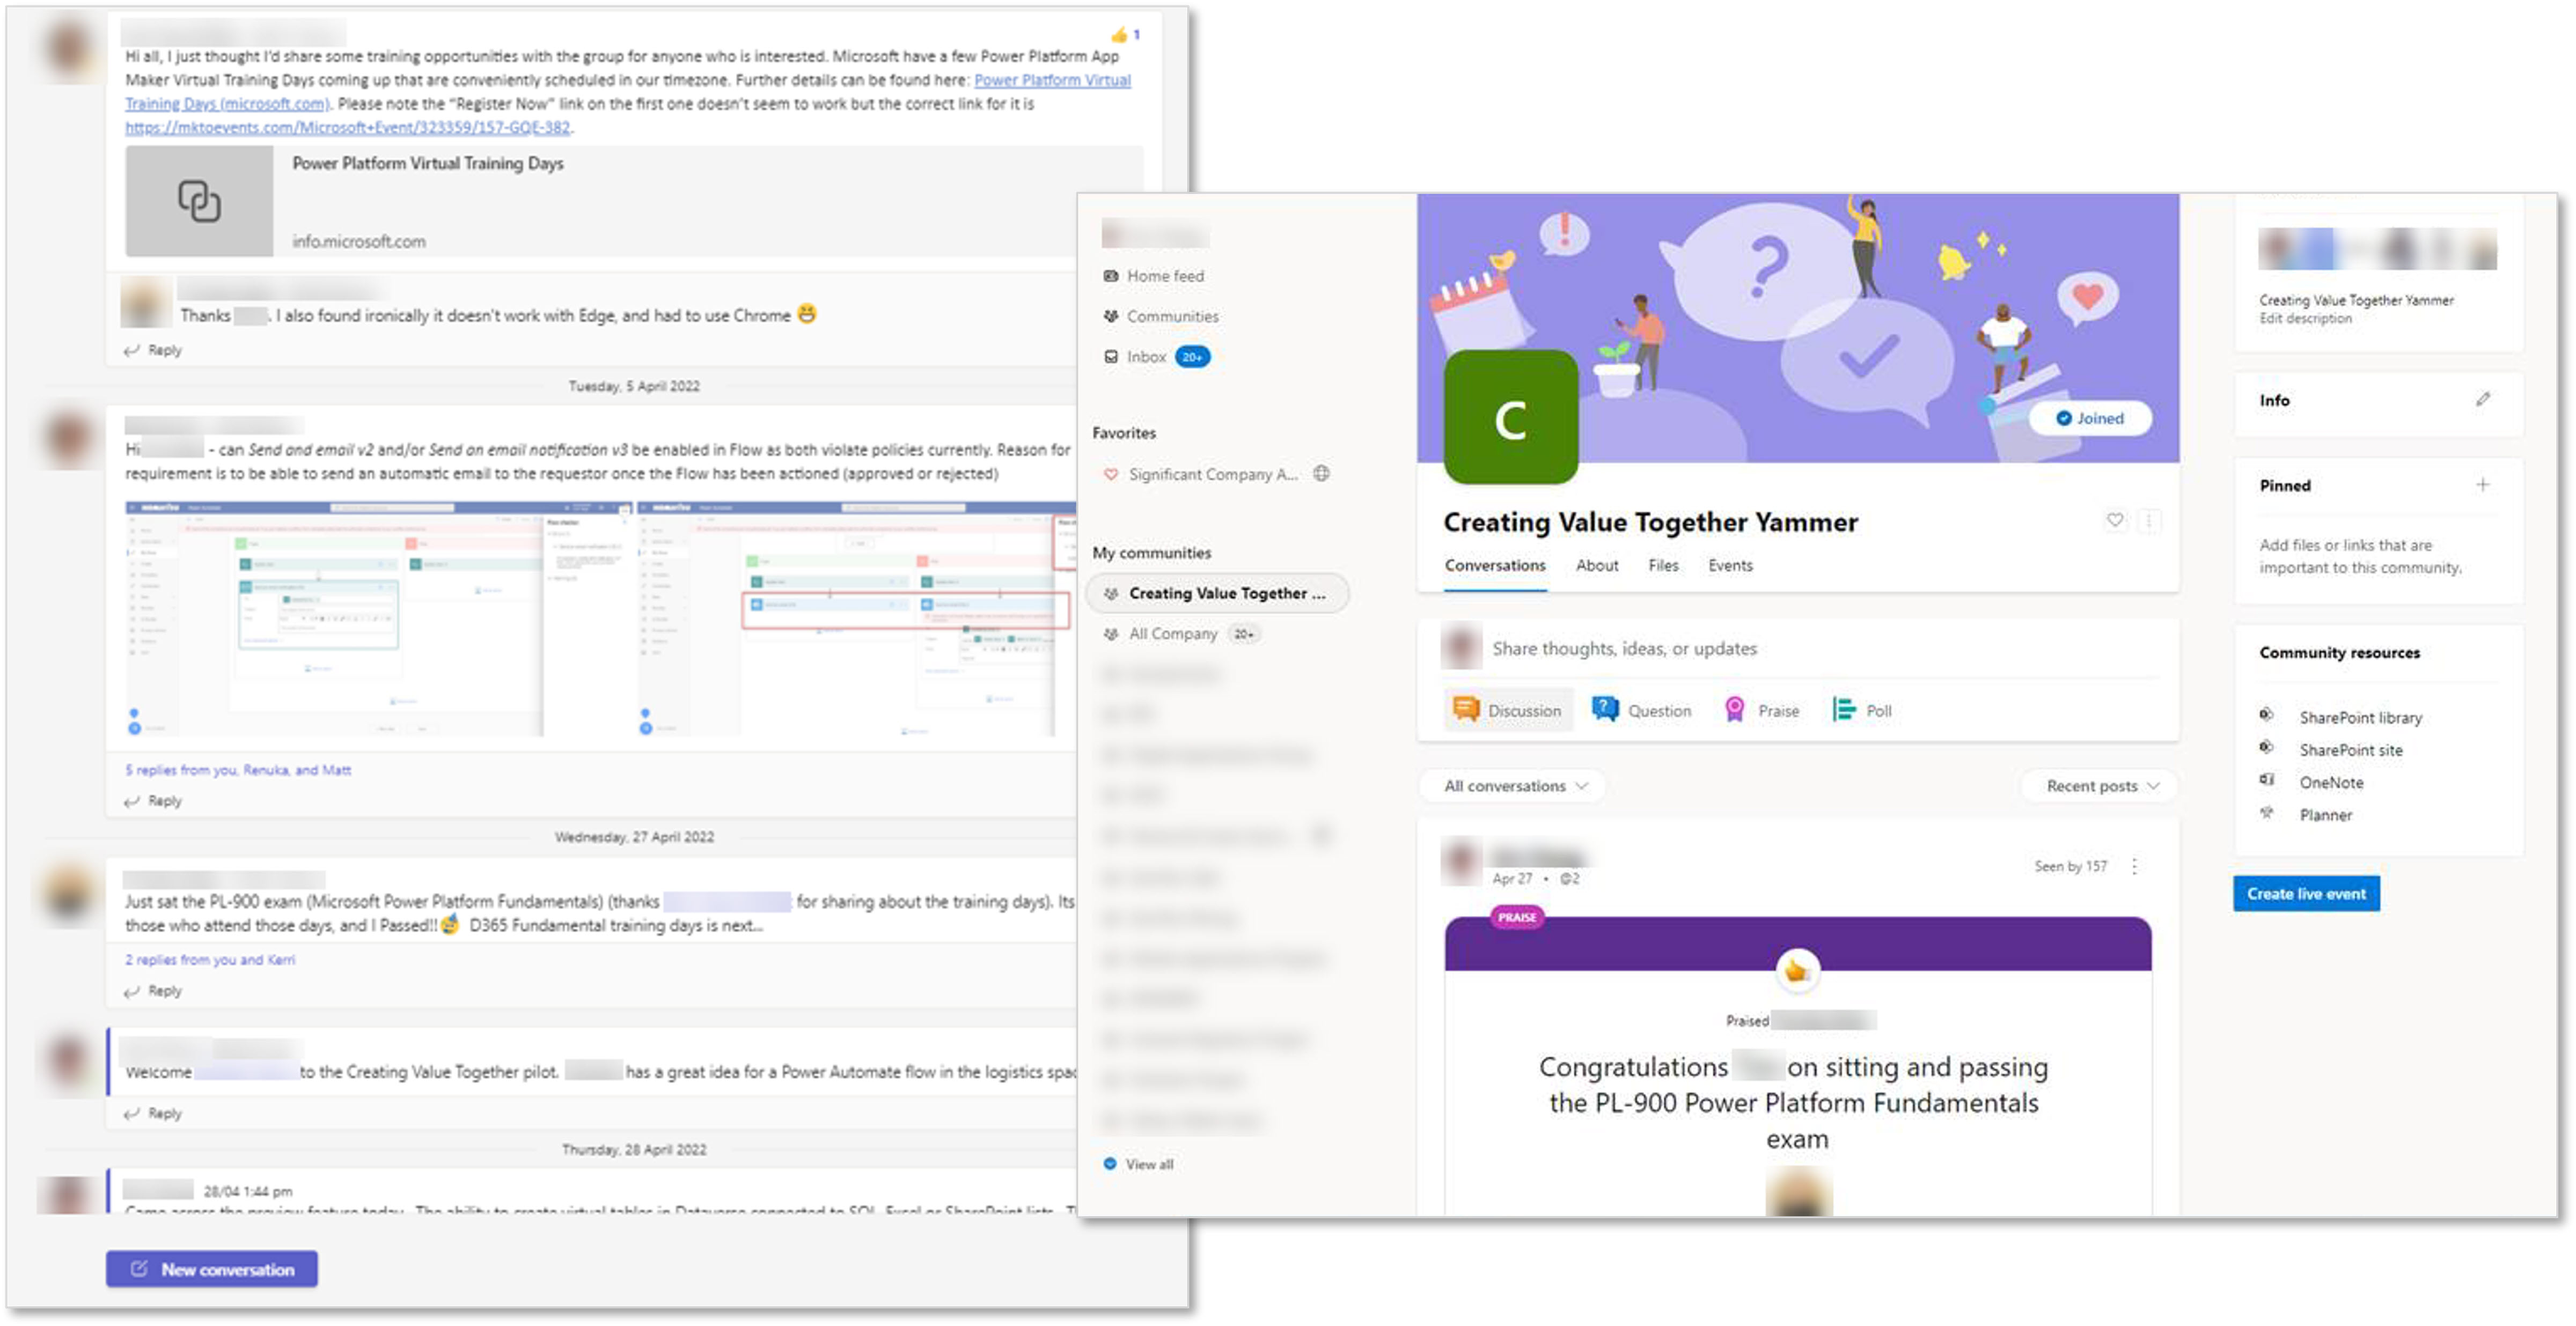 Citizen developers collaborate using Microsoft Teams and Yammer